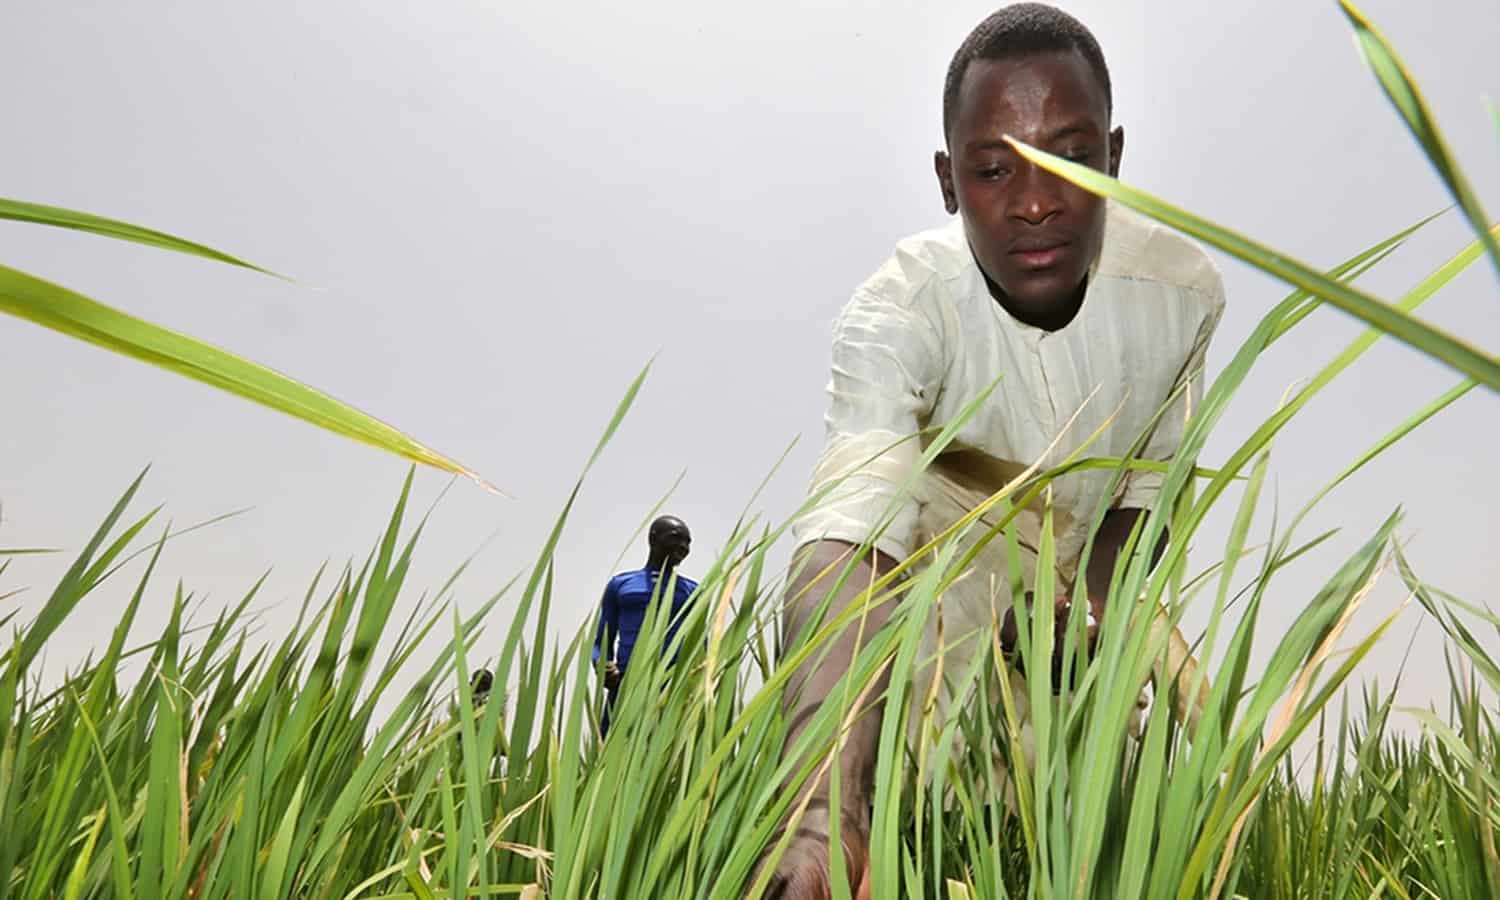 System of Rice Intensification (SRI) is bringing rural farmers closer to food self-sufficiency in over 50 countries with the help of organizations like CORAF.